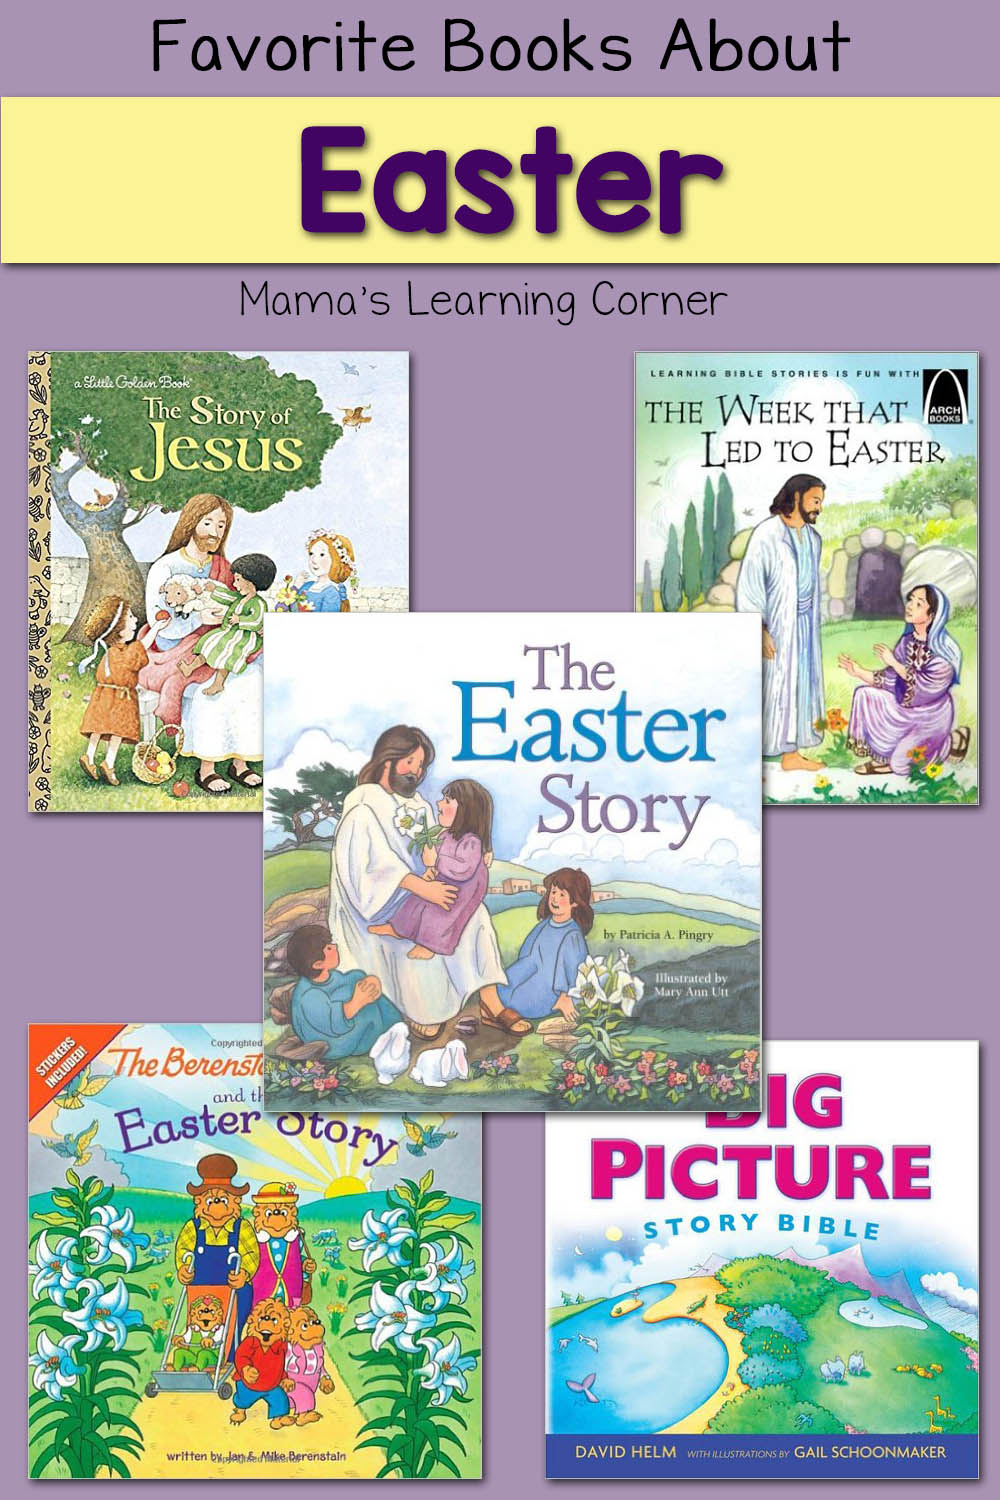 Favorite Books About Easter